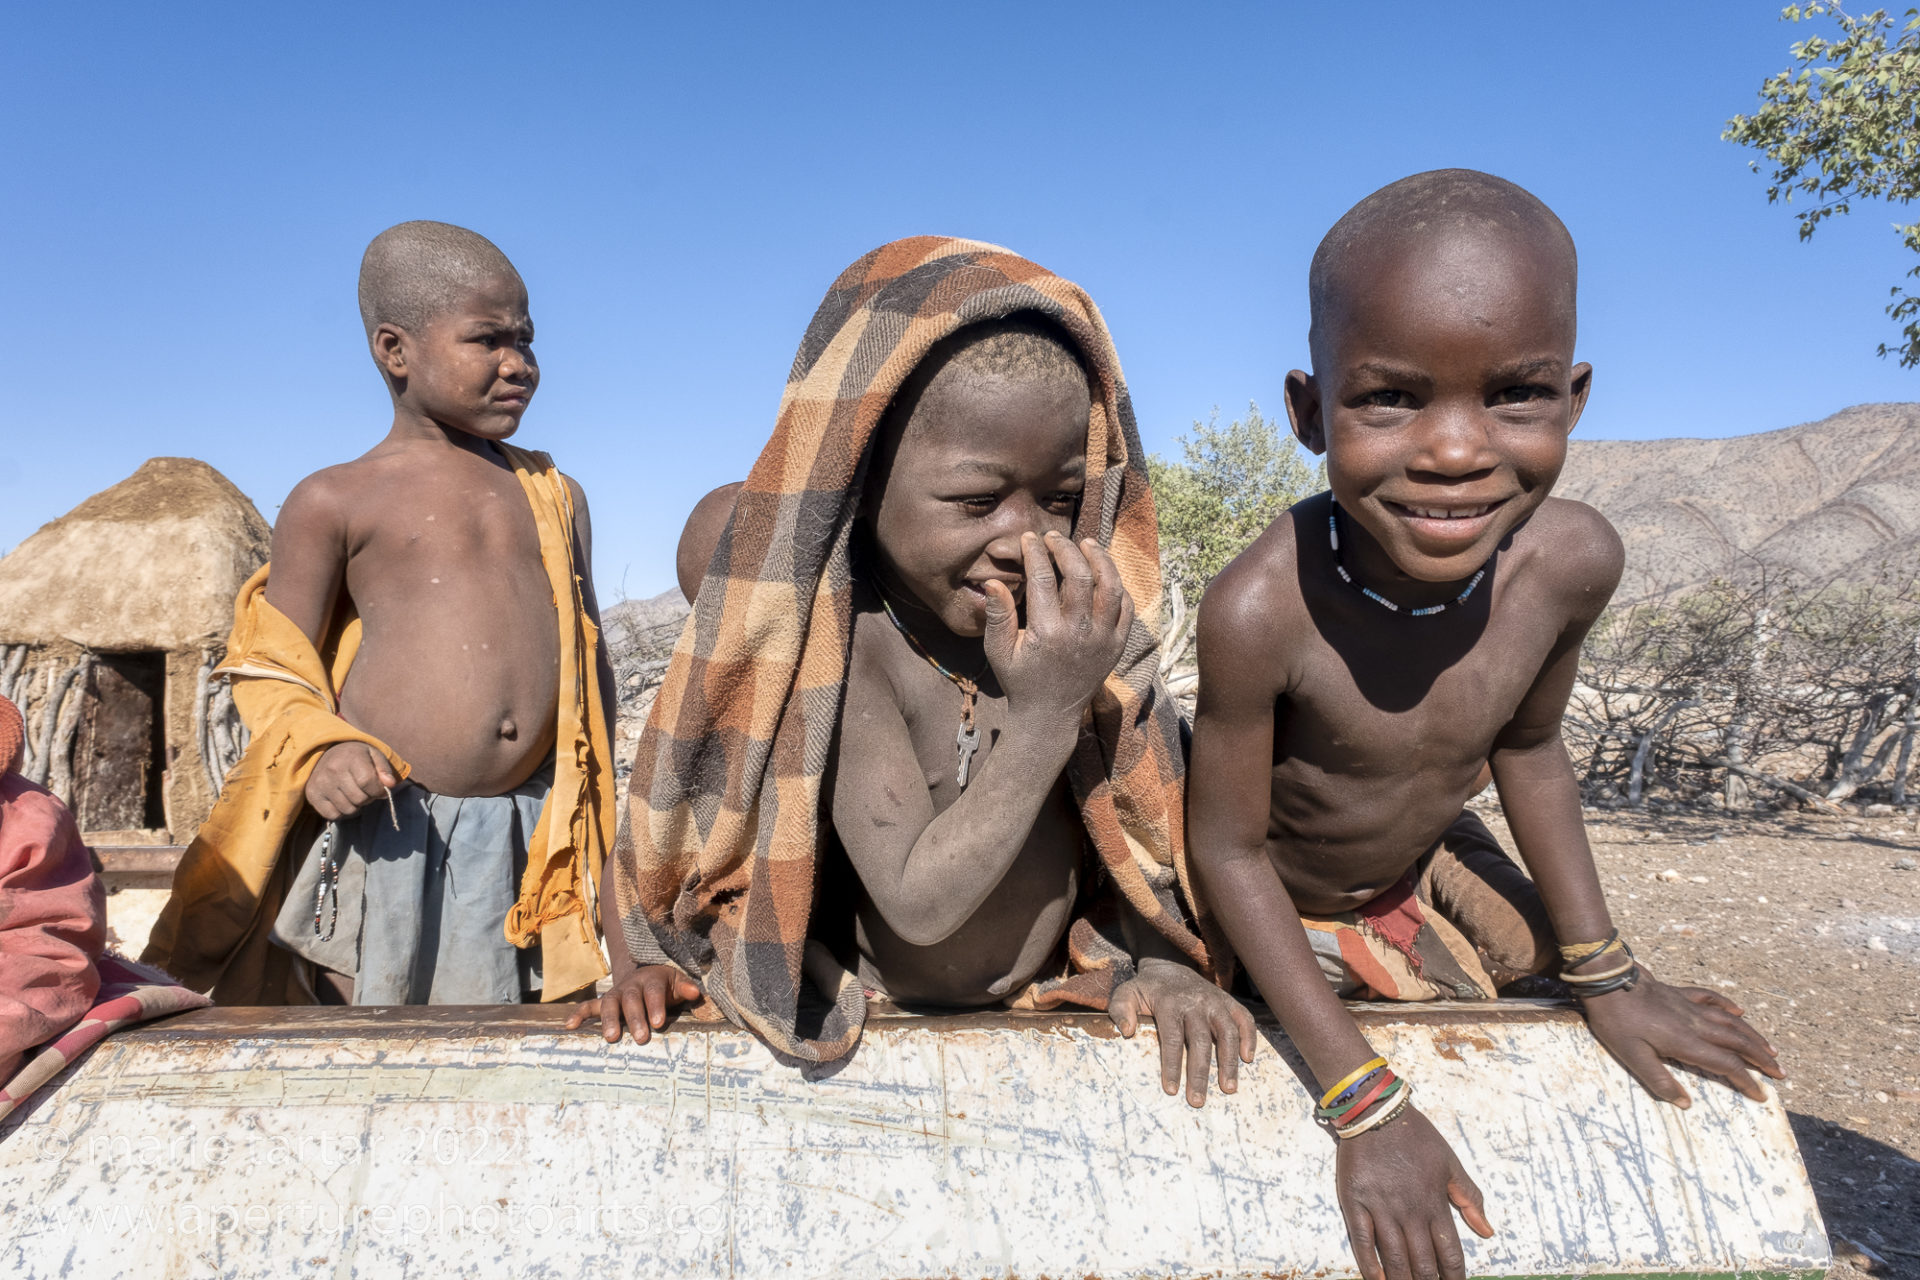 HImba boys playing in the bed of an abandoned truck bed in northern Namibia